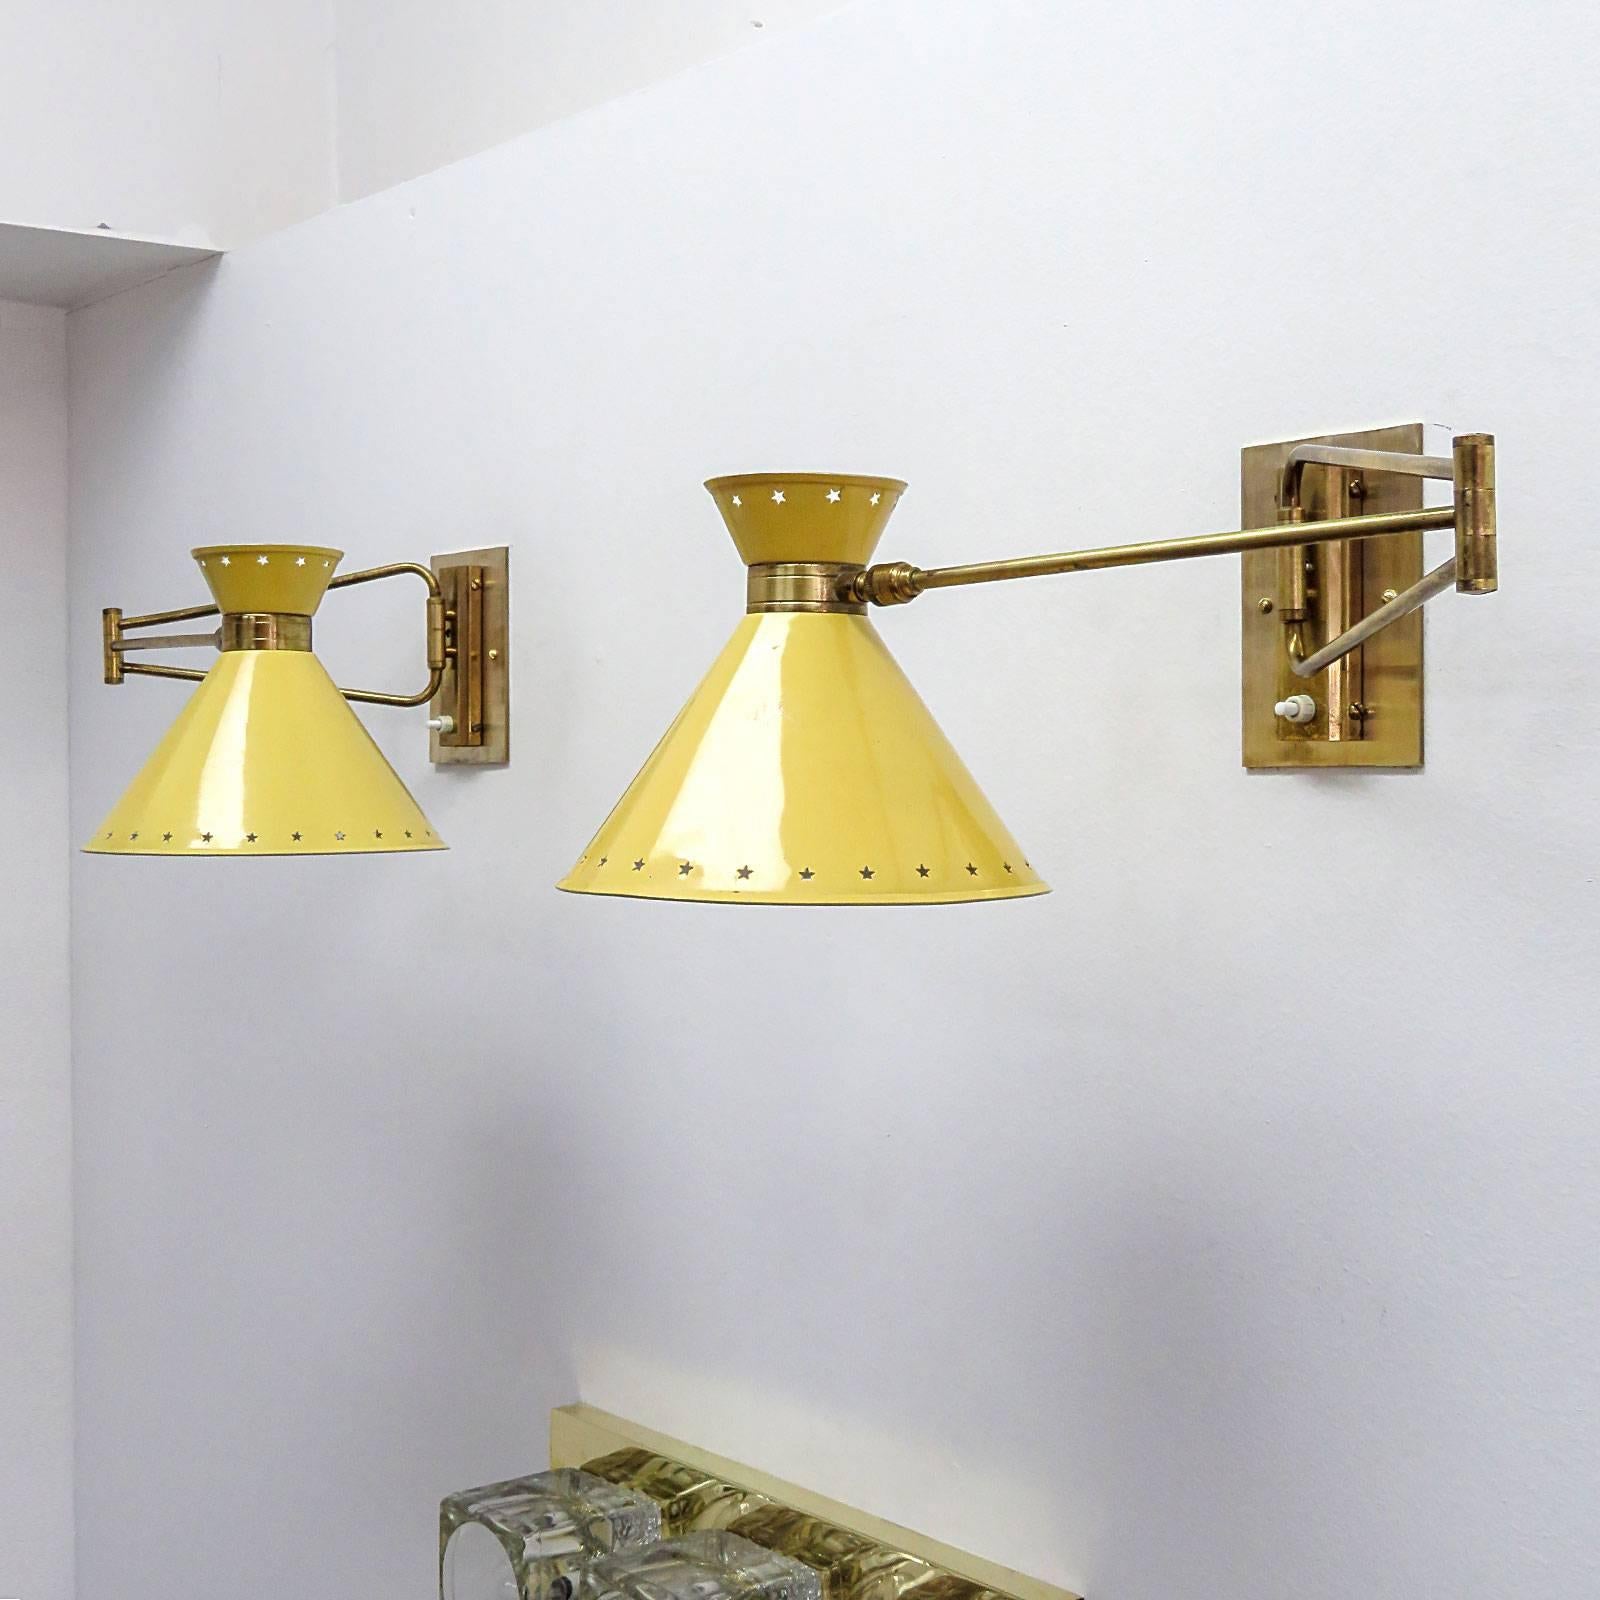 Enameled Pair of Swing Arm Sconces by Rene Mathieu for Lunel